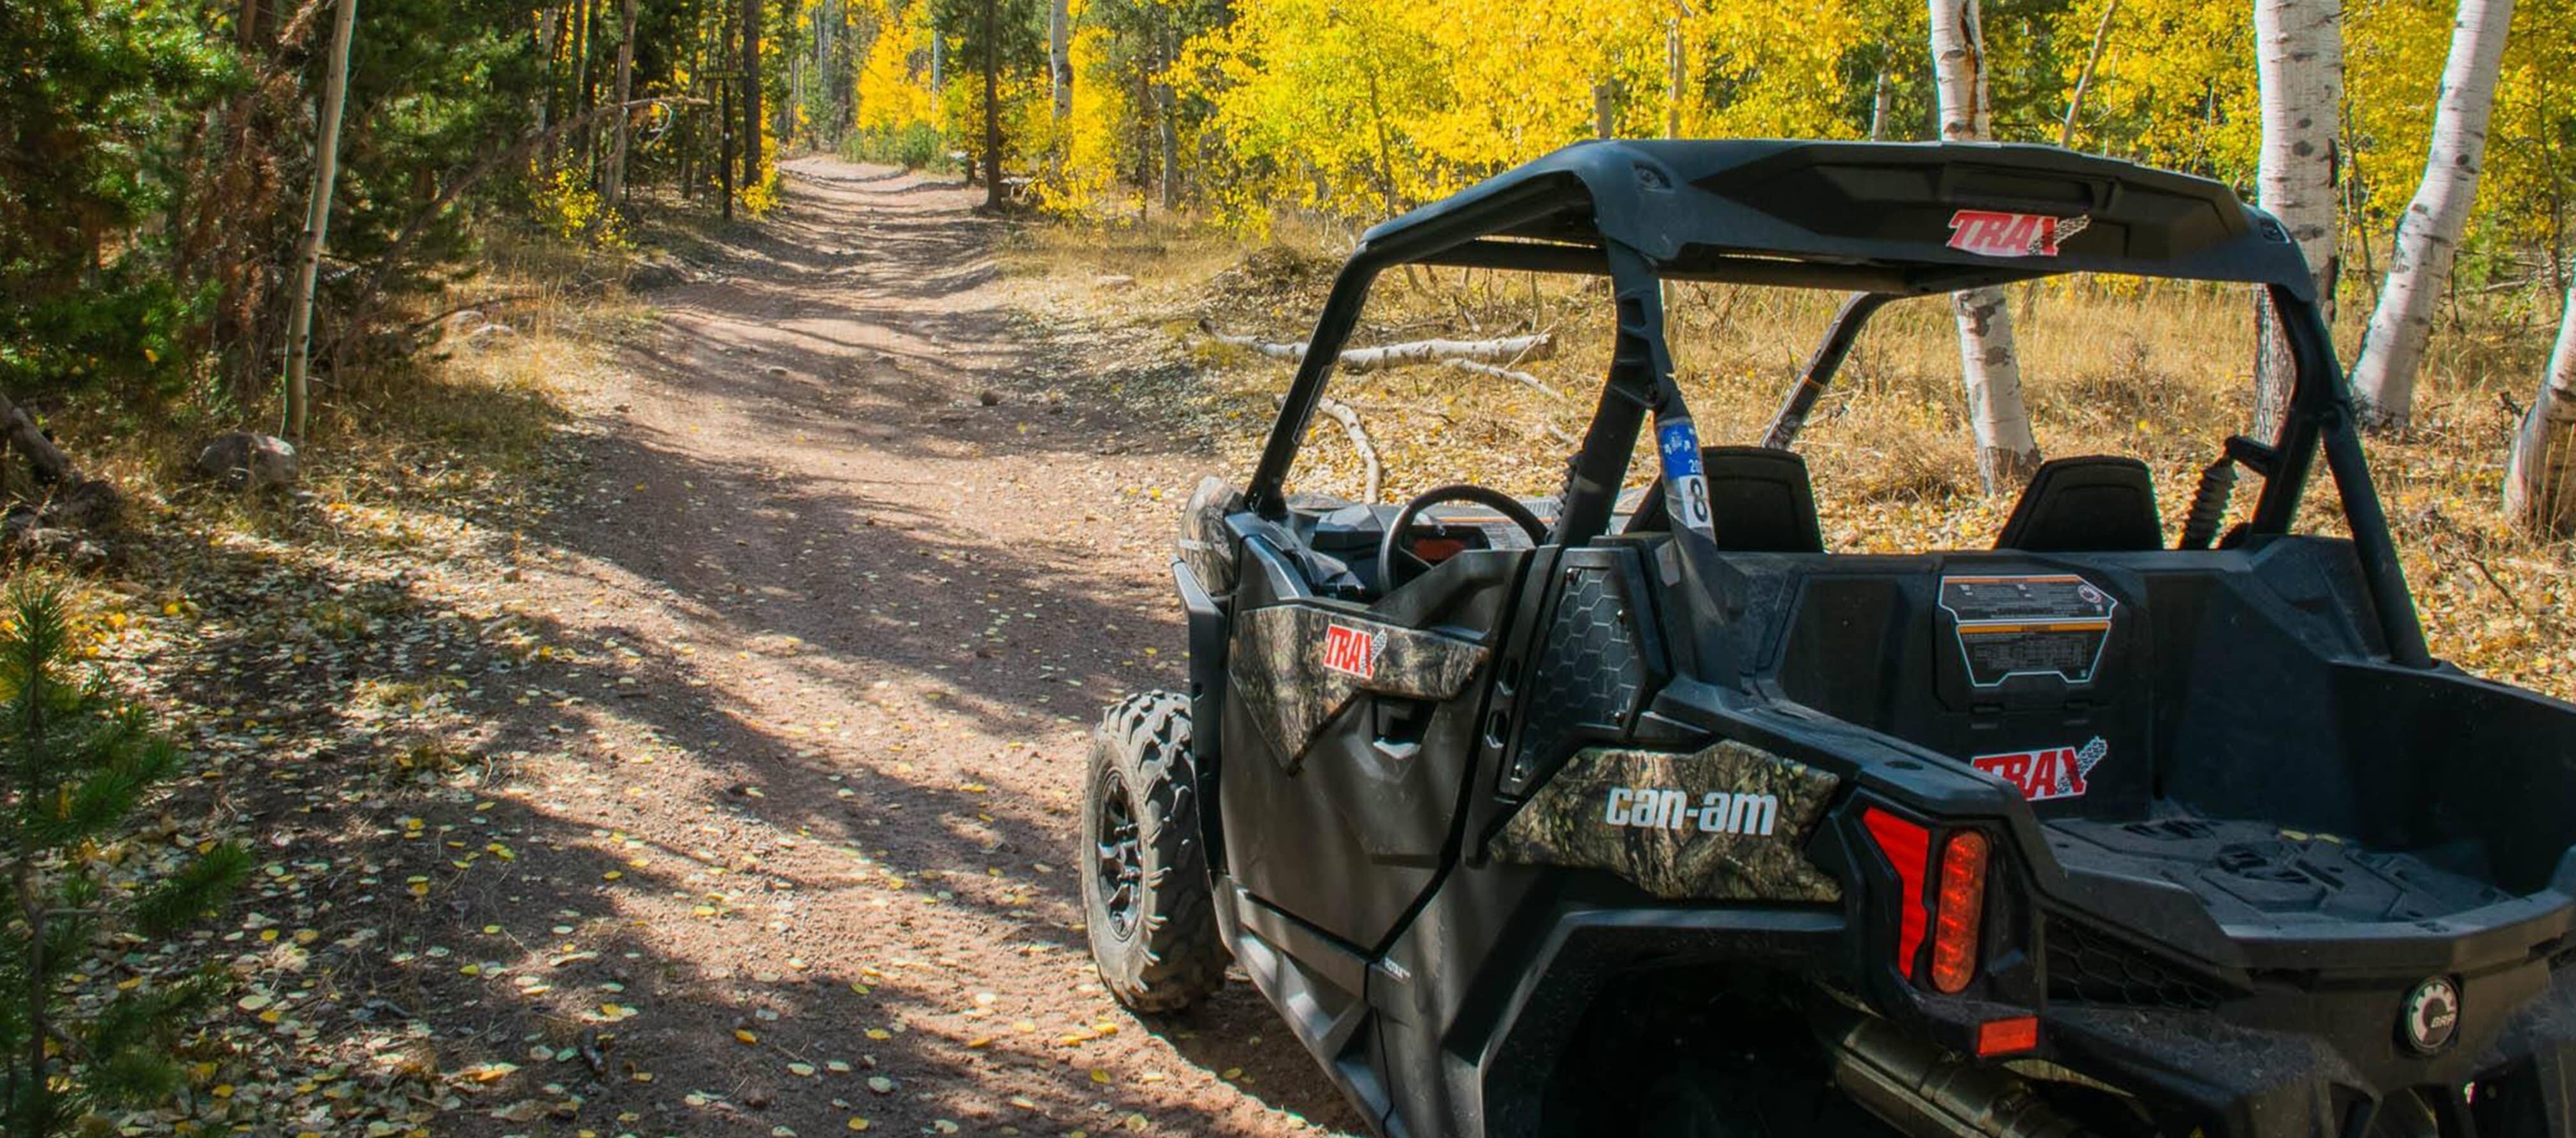 Can-Am vehicle on a trail in the forest